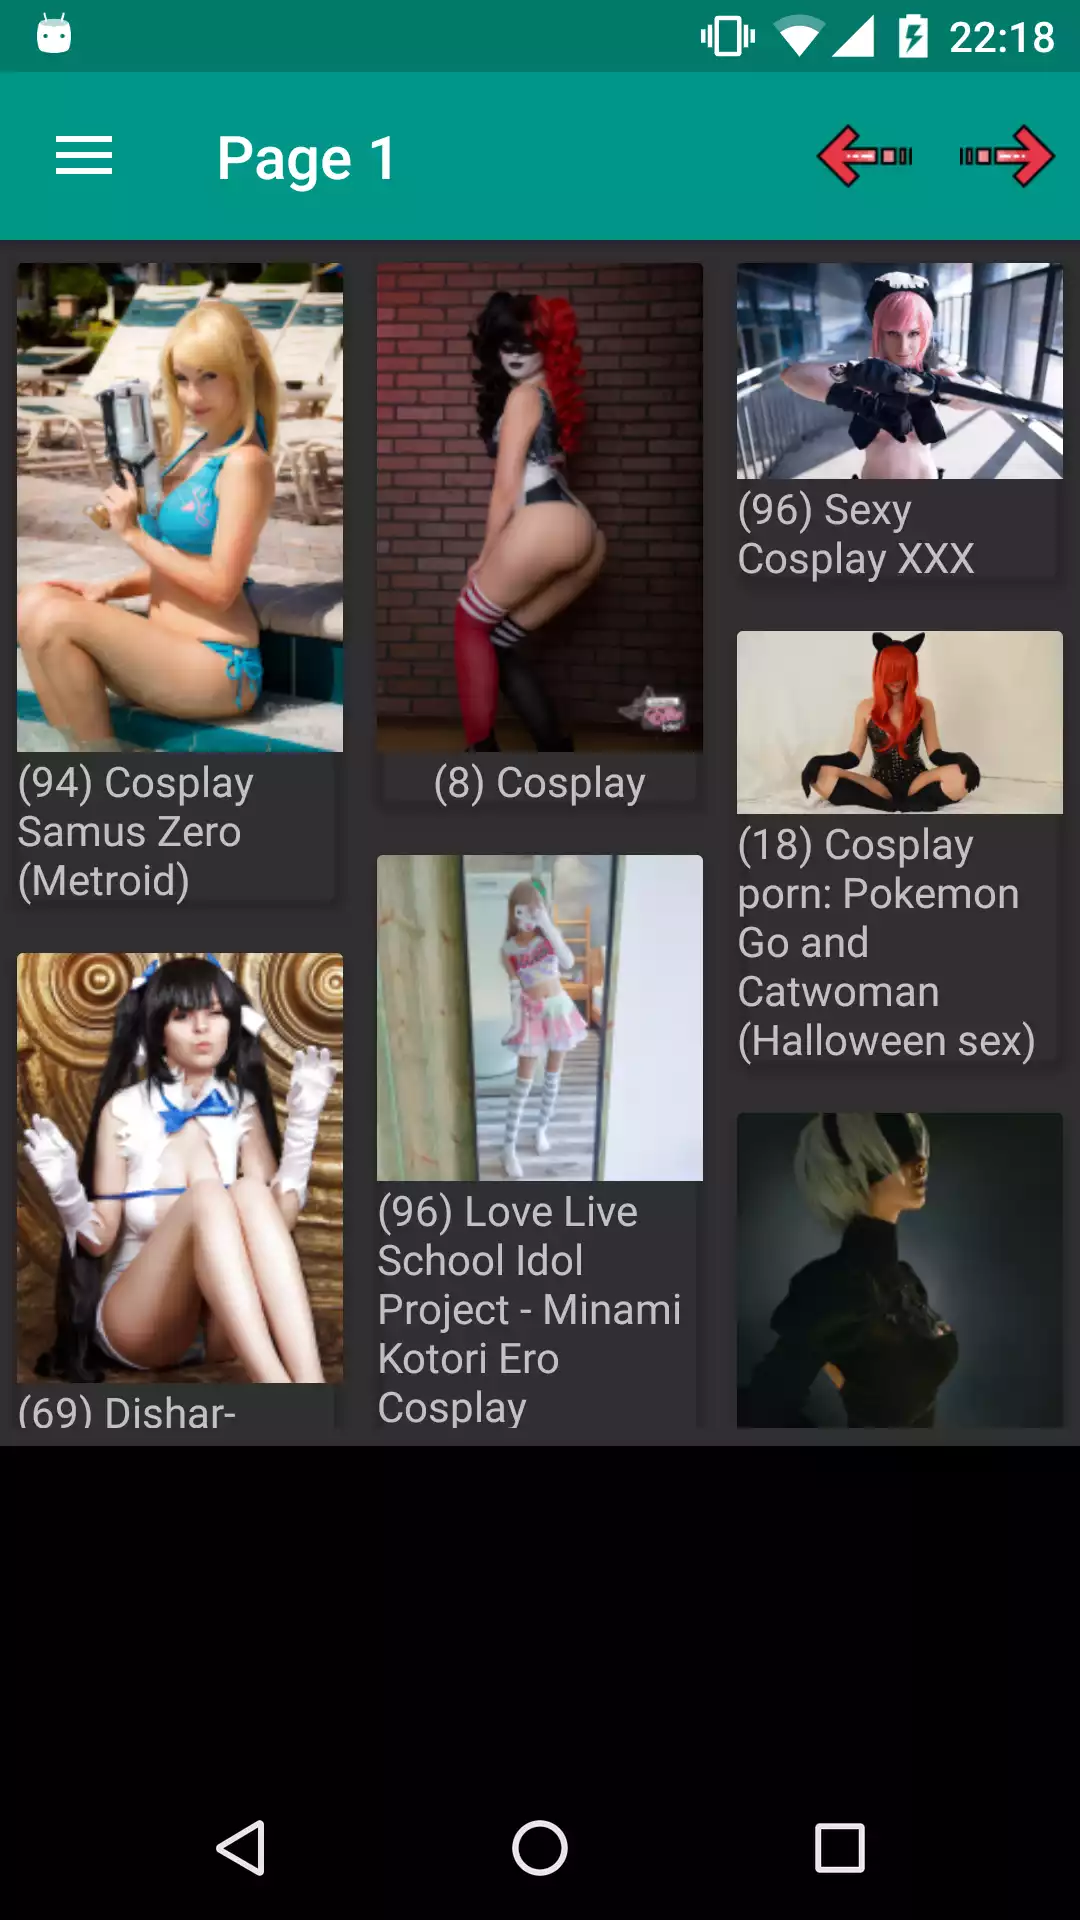 Cosplay Galleries 2 apks,puzzle,nhentai,download,hintai,apps,pictures,anime,cosplay,app,best,pornstars,appa,galleries,erotic,sexy,wallpaper,hot,picture,porn,apk,hentai,amateurs